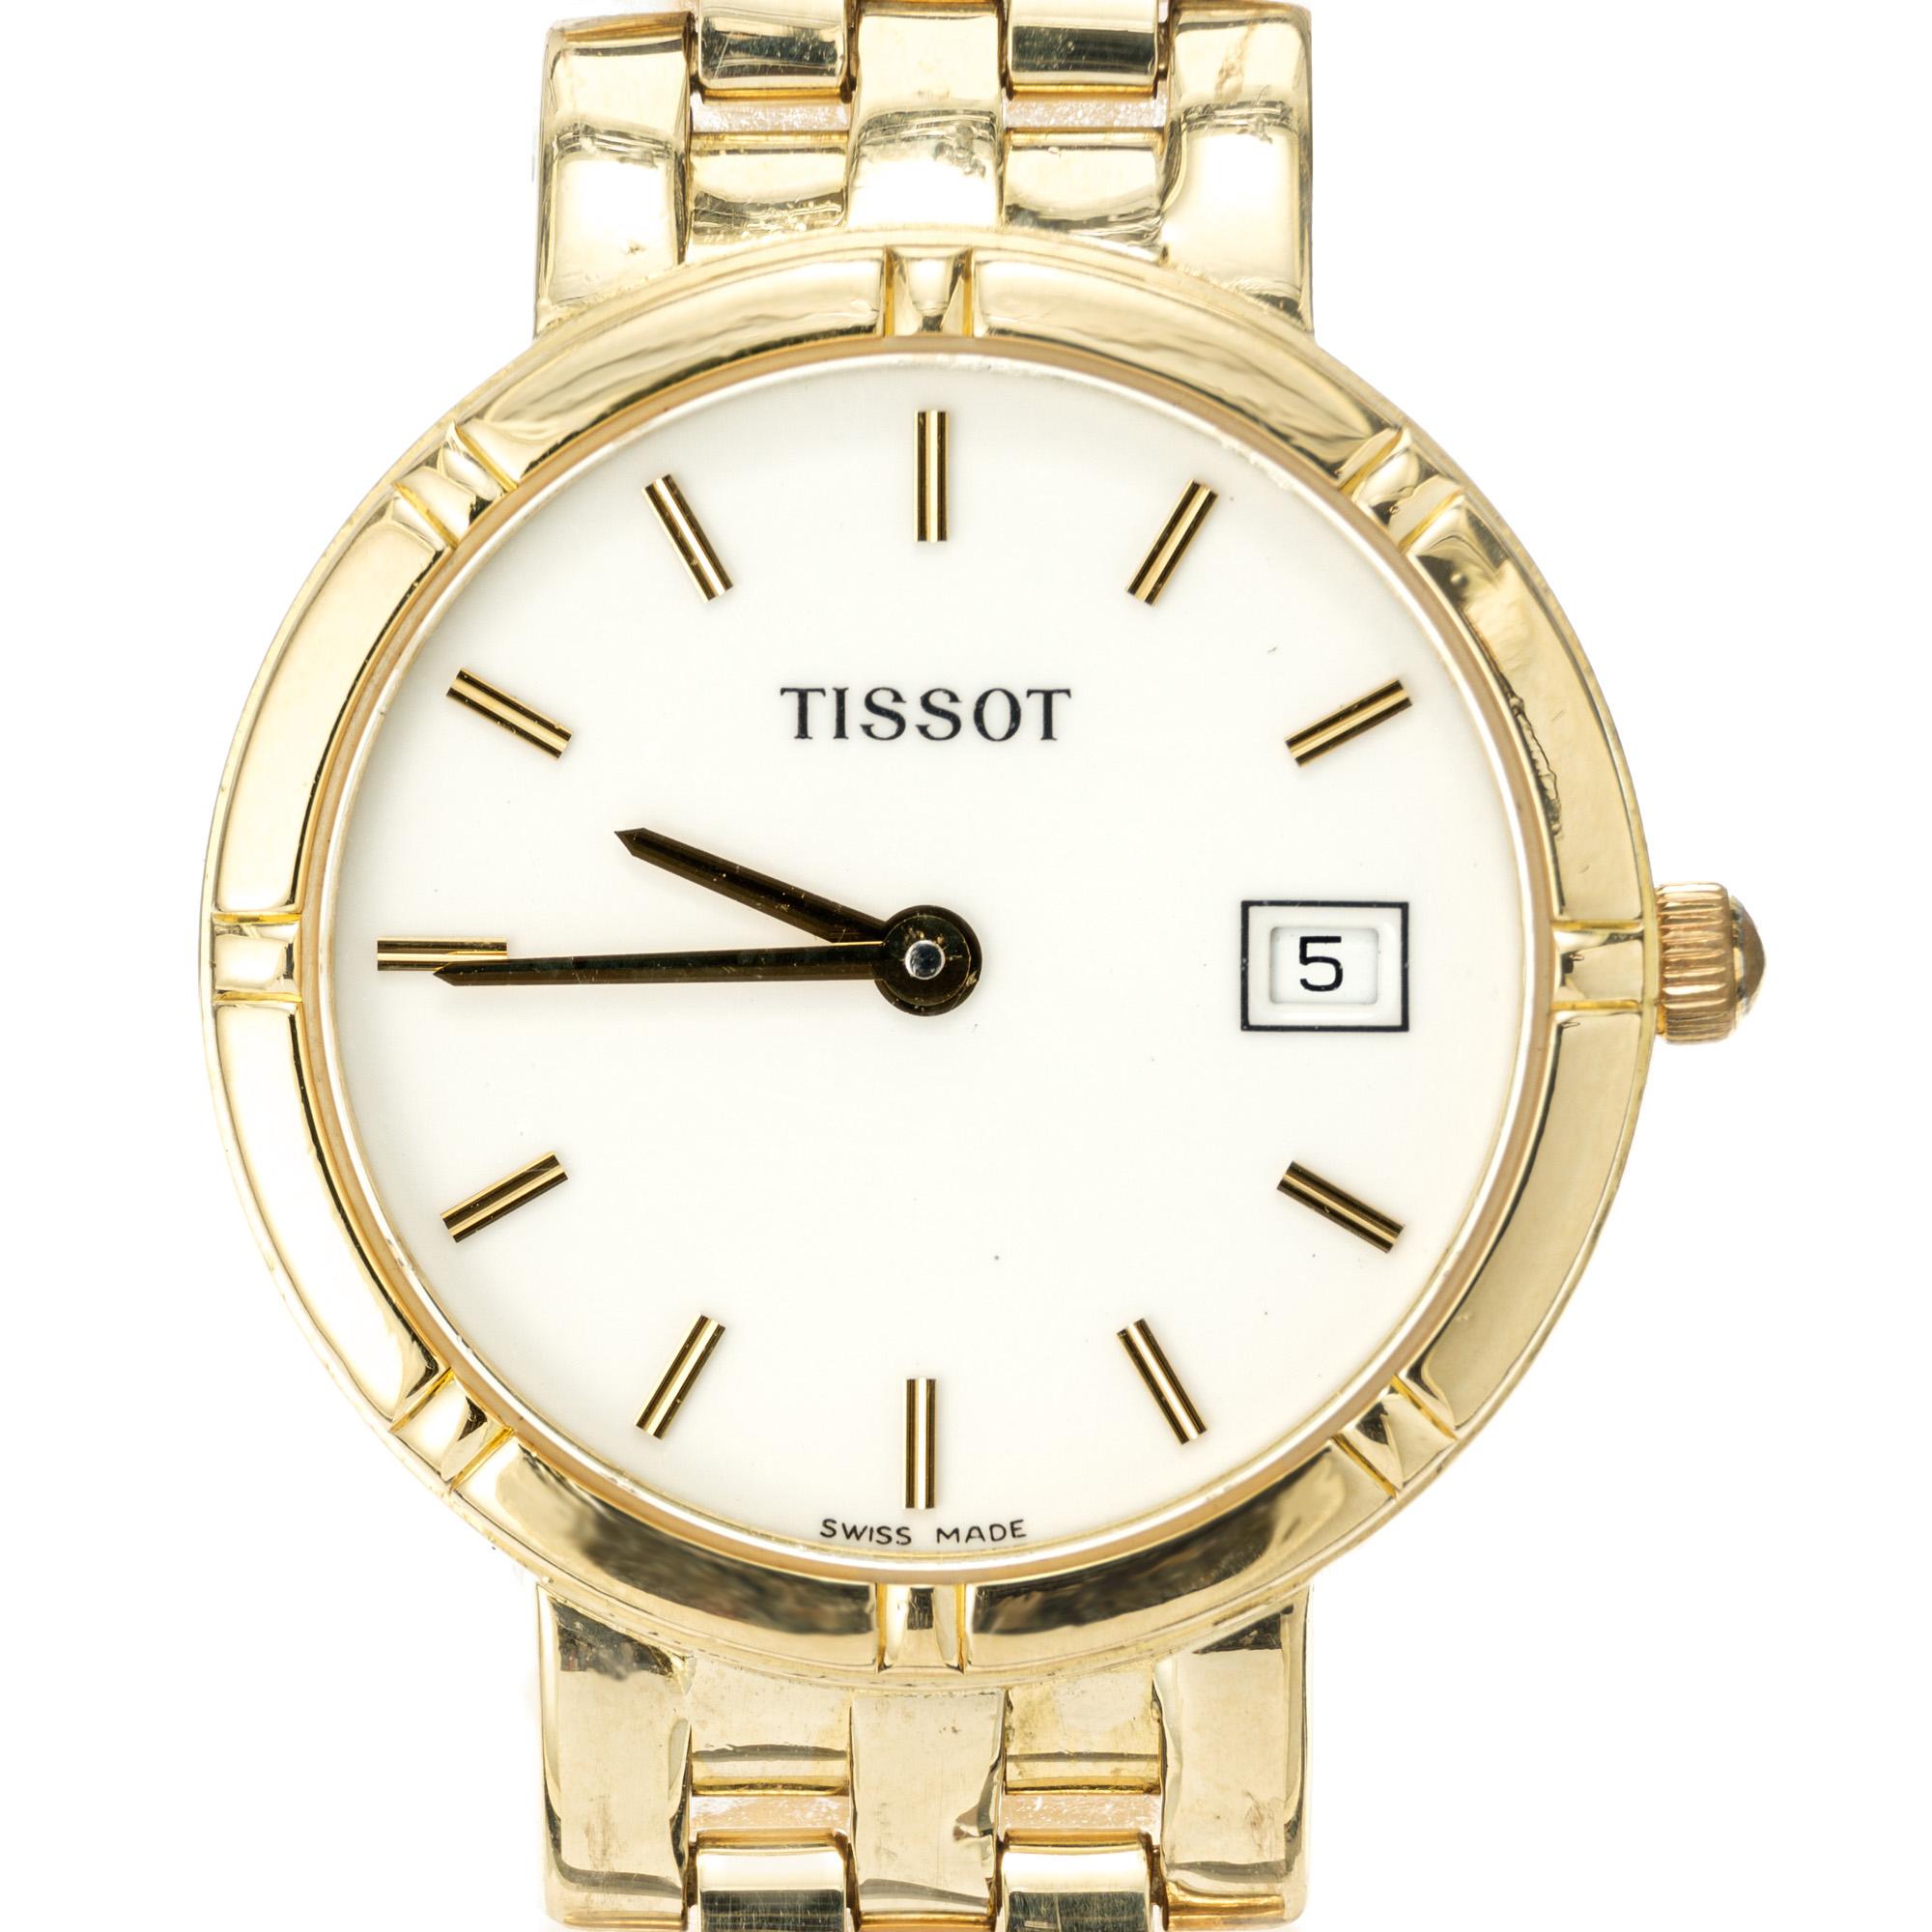 Tissot Ladies Five row panther link wristwatch. 18k gold quartz wristwatch with day date. Circa 2000's. Full length may be shortened. Length just under 7.25 Inches. 

Length: 35.05mm
Width: 26mm
Band width at case: 14mm
Case thickness: 5.05mm
Band: